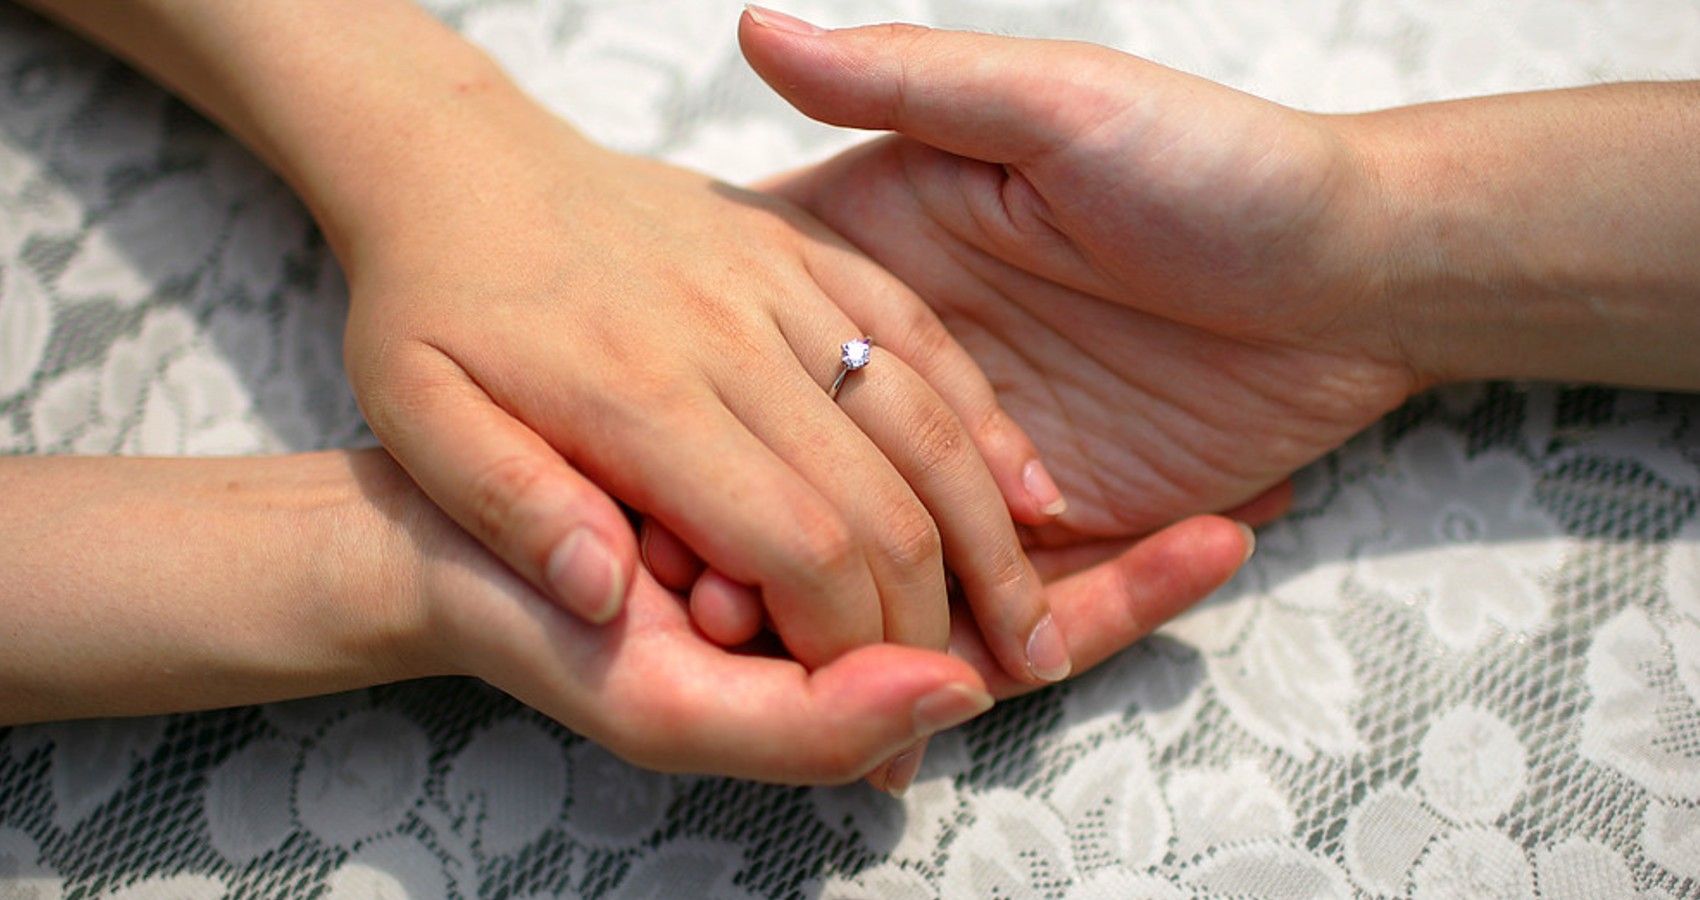 A woman's hands holding on to a males hand